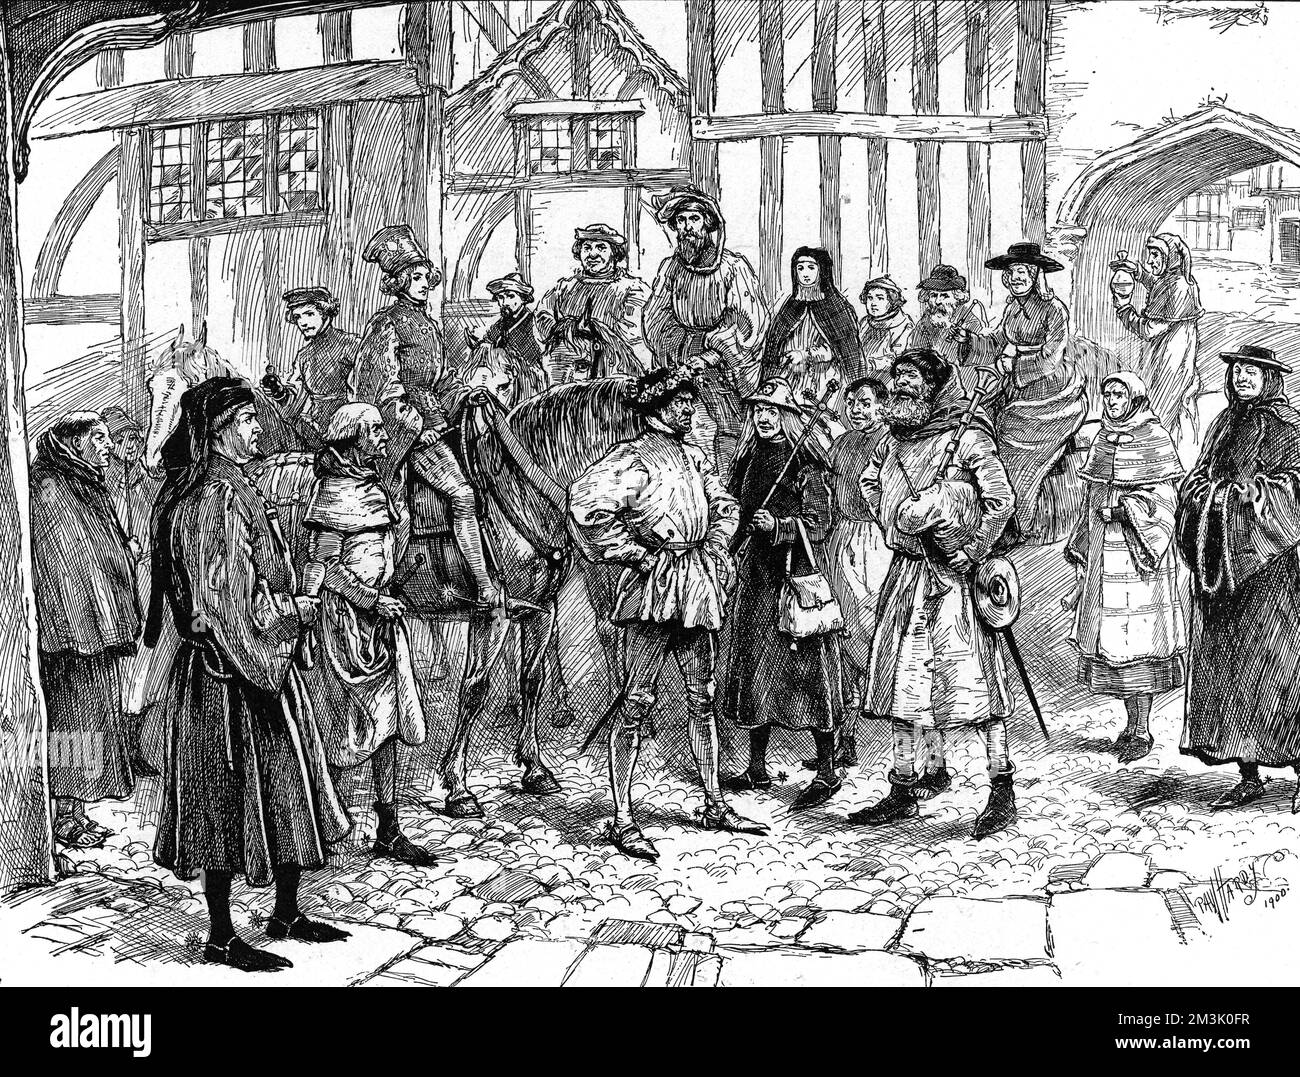 An artist's impression of how Chaucer's Canterbury Pilgrims may have looked as they stood in the yard of the Tabard Inn, 17th April 1387. Only nineteen out of Chaucer's thirty-two pilgrims are pictured in this image.   On foot, from left to right, are the following: Friar, Groom, Chaucer, Reeve, Summoner, Pardoner, Cook, Miller, Serjeant-at-Law and the Monk.   Mounted on horses, left to right, are: Manciple, Squire, Shipman, Host, Knight, Prioress, Nun's Priest, Franklin, Wife of Bath and the Doctor.     Date: 1901 Stock Photo